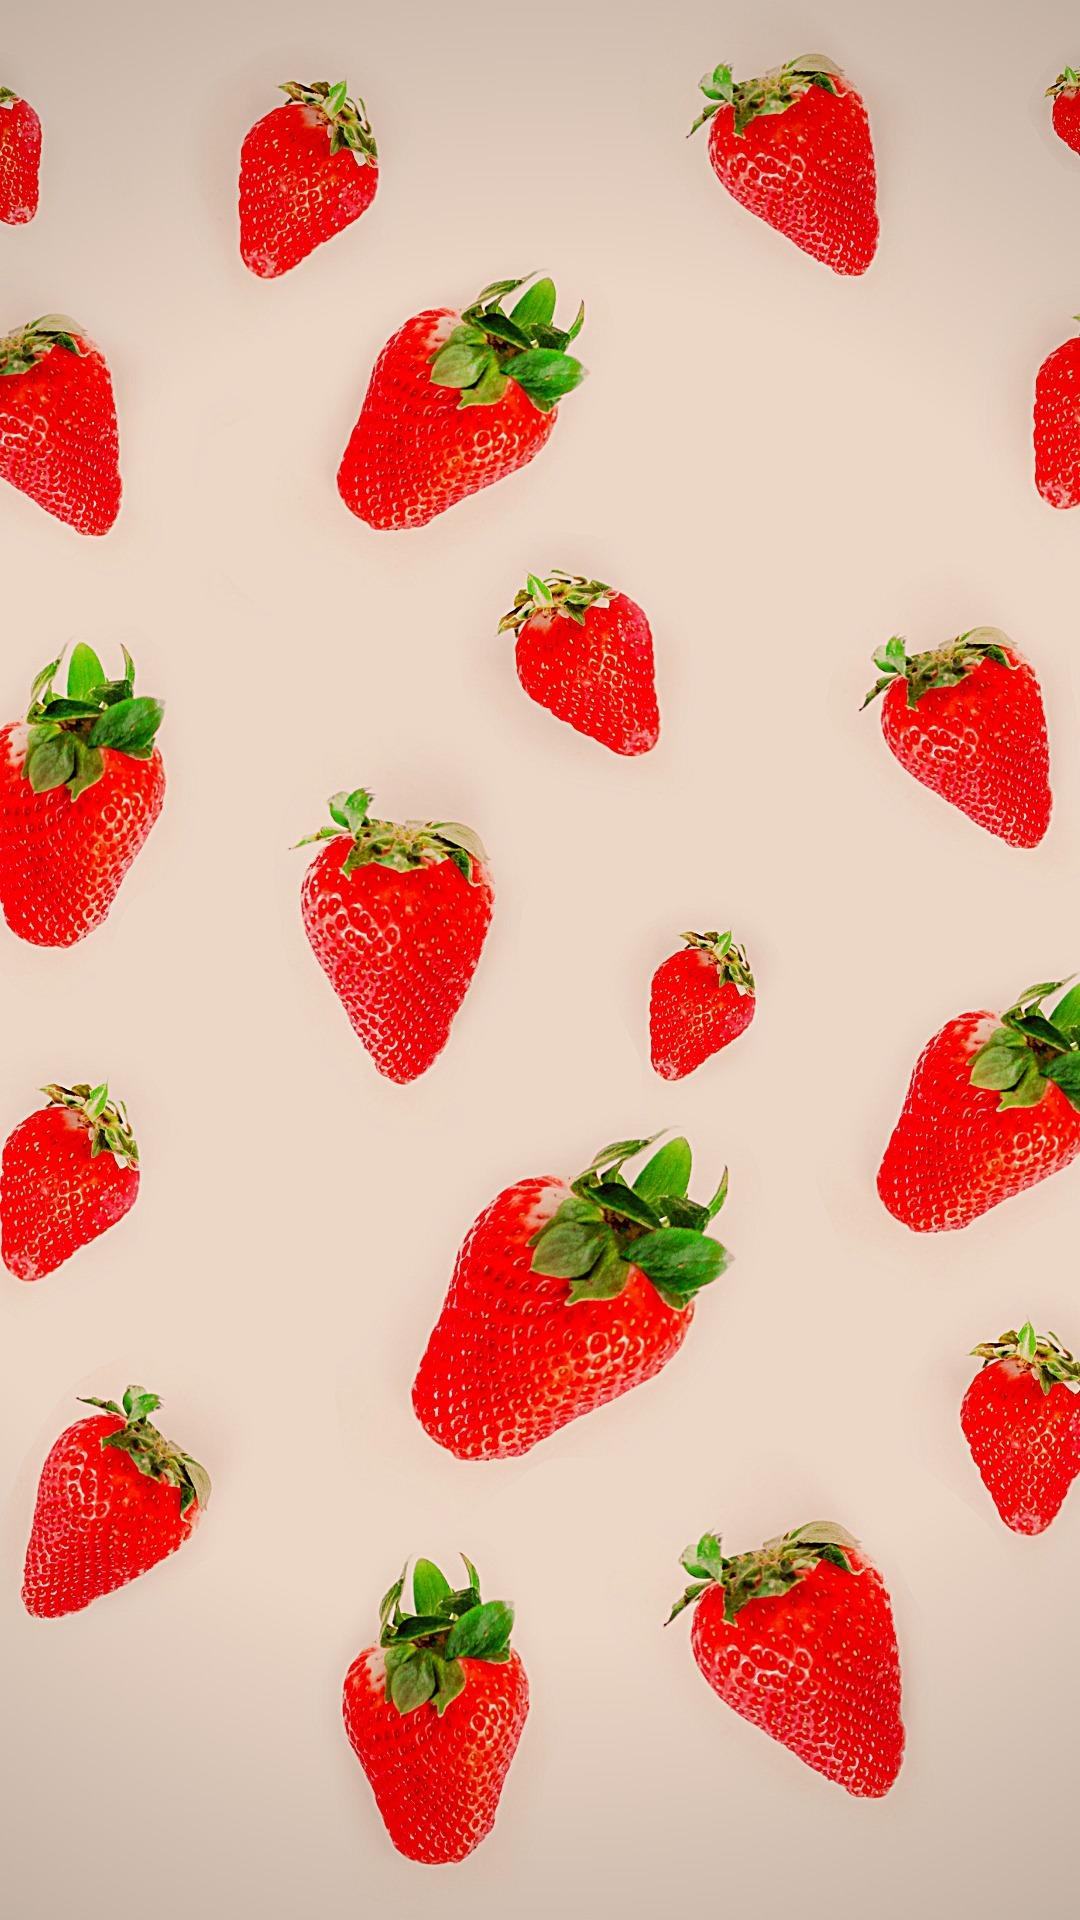 Cute Strawberry iPhone Wallpapers - Top Free Cute Strawberry iPhone ...